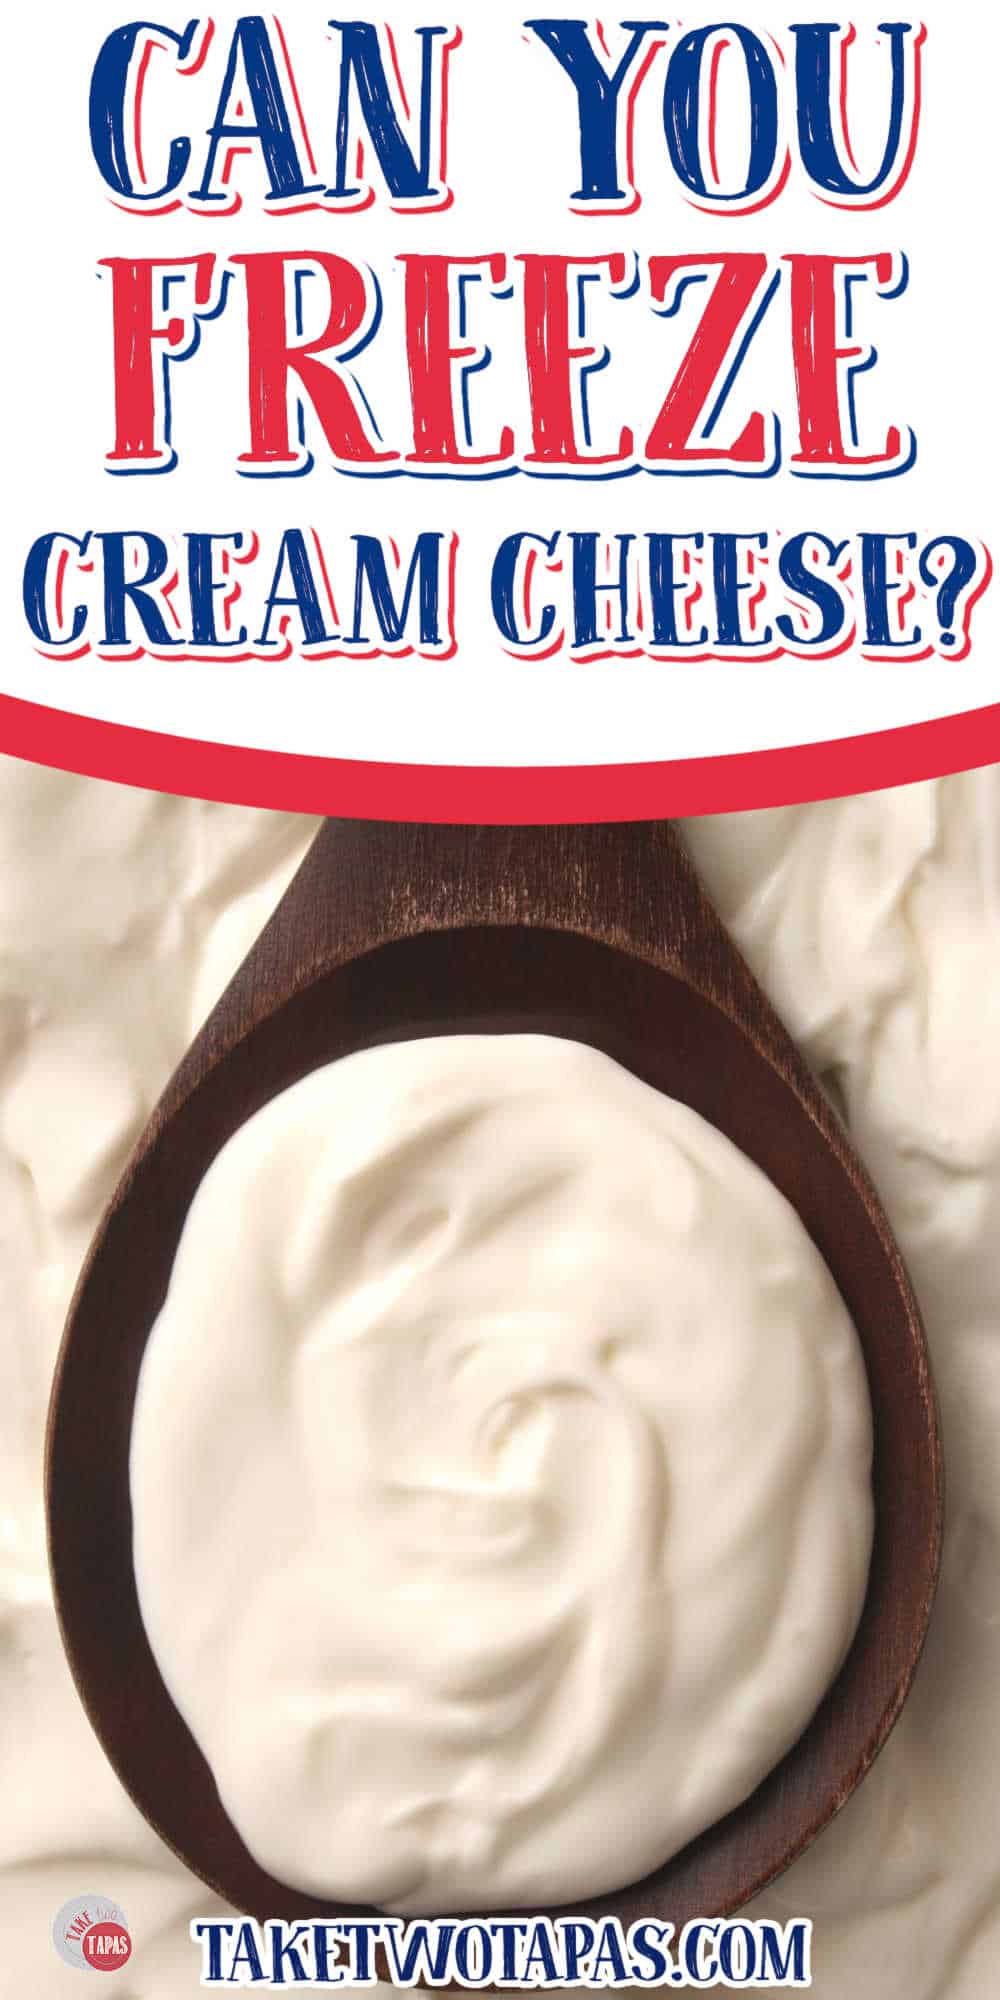 wood spoon of cream cheese with white banner and text